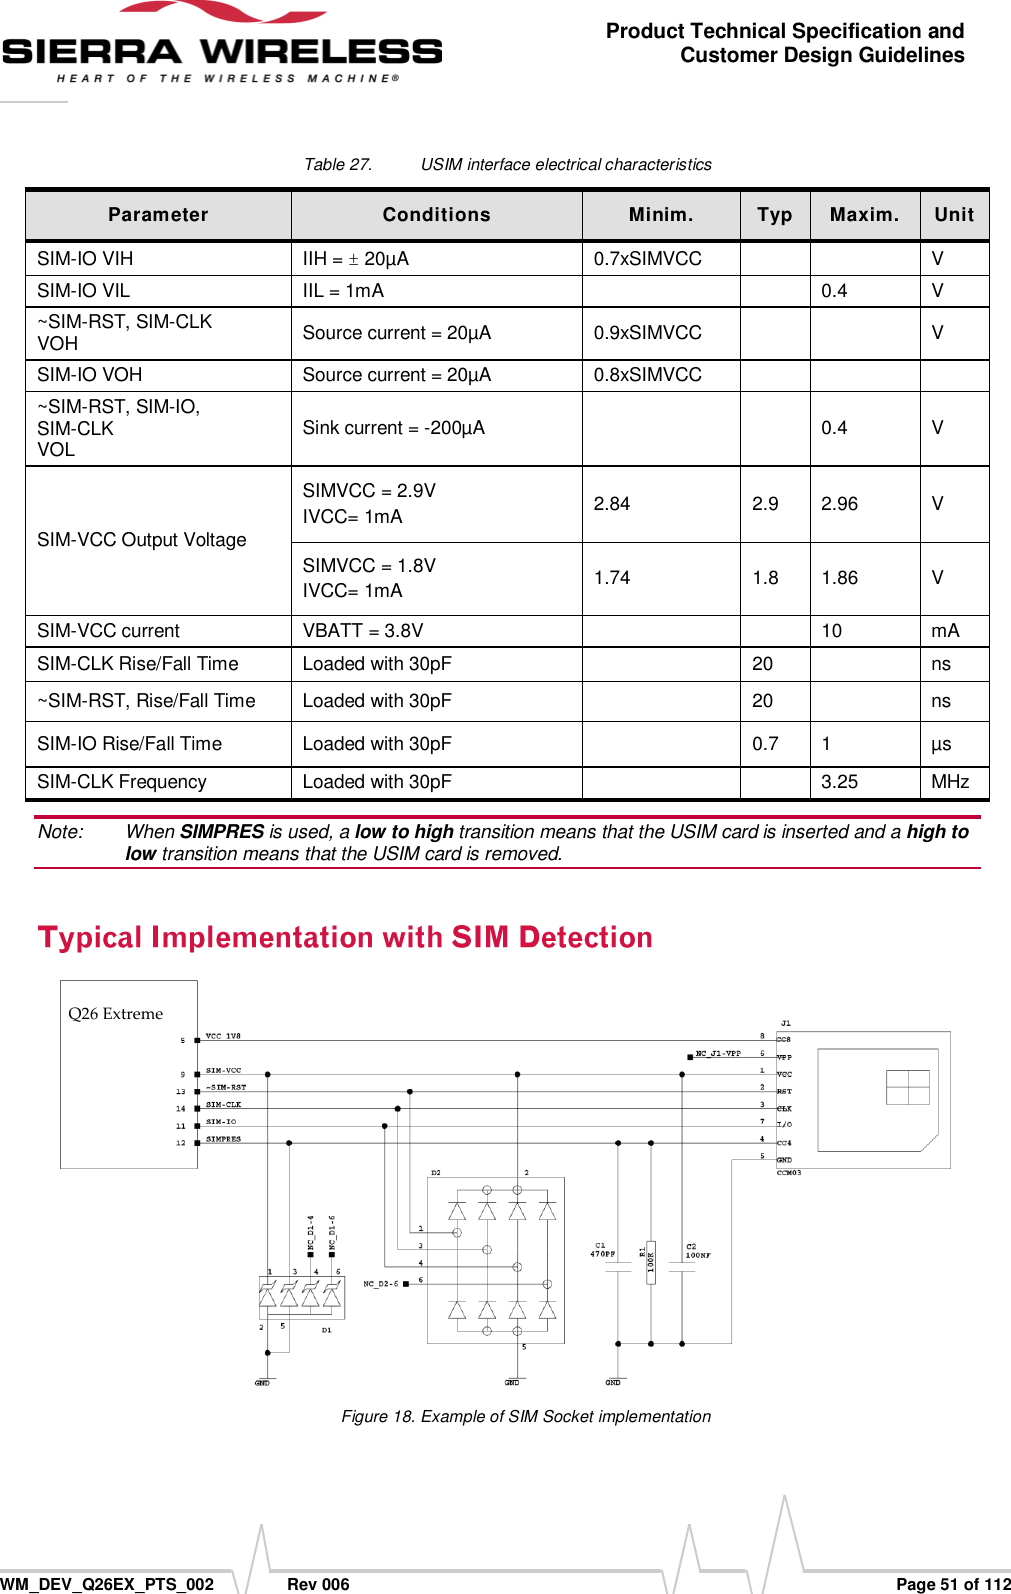      WM_DEV_Q26EX_PTS_002  Rev 006  Page 51 of 112 Product Technical Specification and Customer Design Guidelines Table 27.  USIM interface electrical characteristics  Parameter Conditions Minim. Typ Maxim. Unit SIM-IO VIH IIH = ± 20µA 0.7xSIMVCC   V SIM-IO VIL IIL = 1mA   0.4 V ~SIM-RST, SIM-CLK VOH Source current = 20µA 0.9xSIMVCC   V SIM-IO VOH Source current = 20µA 0.8xSIMVCC    ~SIM-RST, SIM-IO,  SIM-CLK   VOL Sink current = -200µA   0.4 V SIM-VCC Output Voltage SIMVCC = 2.9V IVCC= 1mA 2.84 2.9 2.96 V SIMVCC = 1.8V IVCC= 1mA 1.74 1.8 1.86 V SIM-VCC current VBATT = 3.8V   10 mA SIM-CLK Rise/Fall Time Loaded with 30pF  20  ns ~SIM-RST, Rise/Fall Time Loaded with 30pF  20  ns SIM-IO Rise/Fall Time Loaded with 30pF  0.7 1 µs SIM-CLK Frequency Loaded with 30pF   3.25 MHz Note:   When SIMPRES is used, a low to high transition means that the USIM card is inserted and a high to low transition means that the USIM card is removed.  Figure 18. Example of SIM Socket implementation Q26 Extreme                  